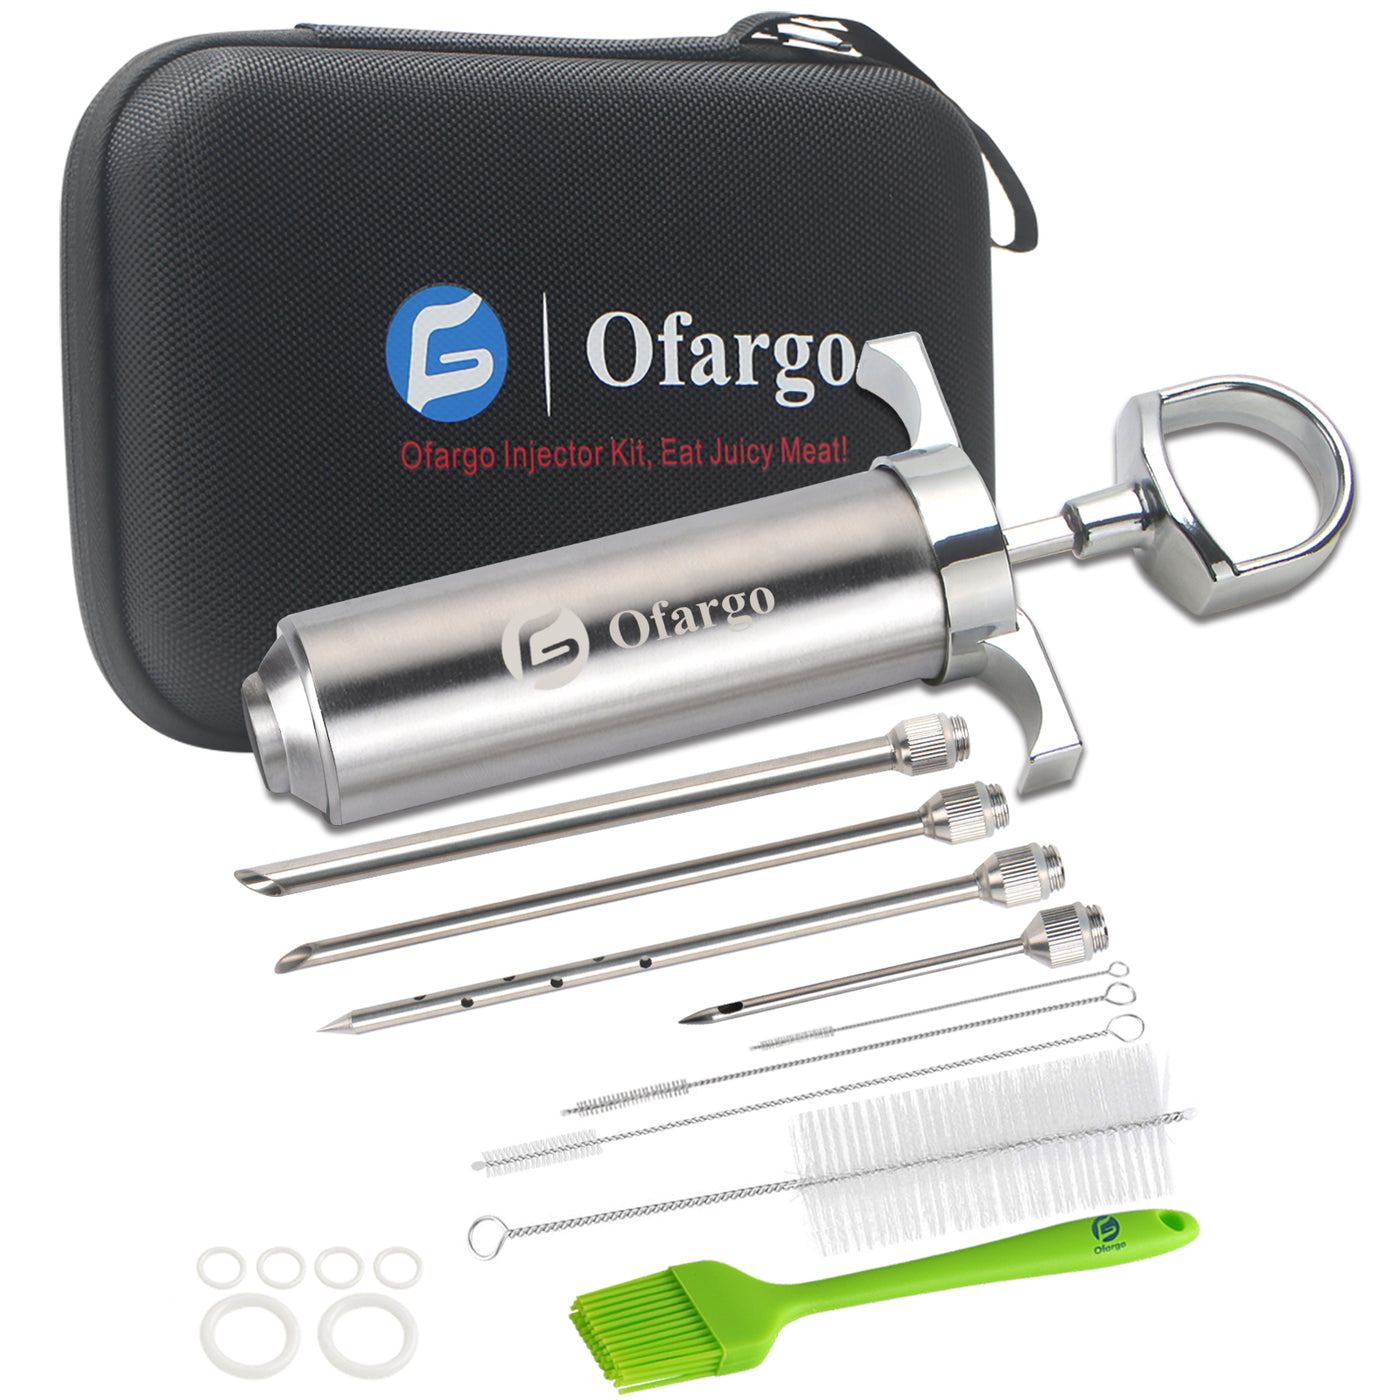 Ofargo Meat Injector, Meat Injectors for Smoking with 3 Marinade Injector  Needles; Injector Marinades for Meats, Turkey, Brisket; 2-oz